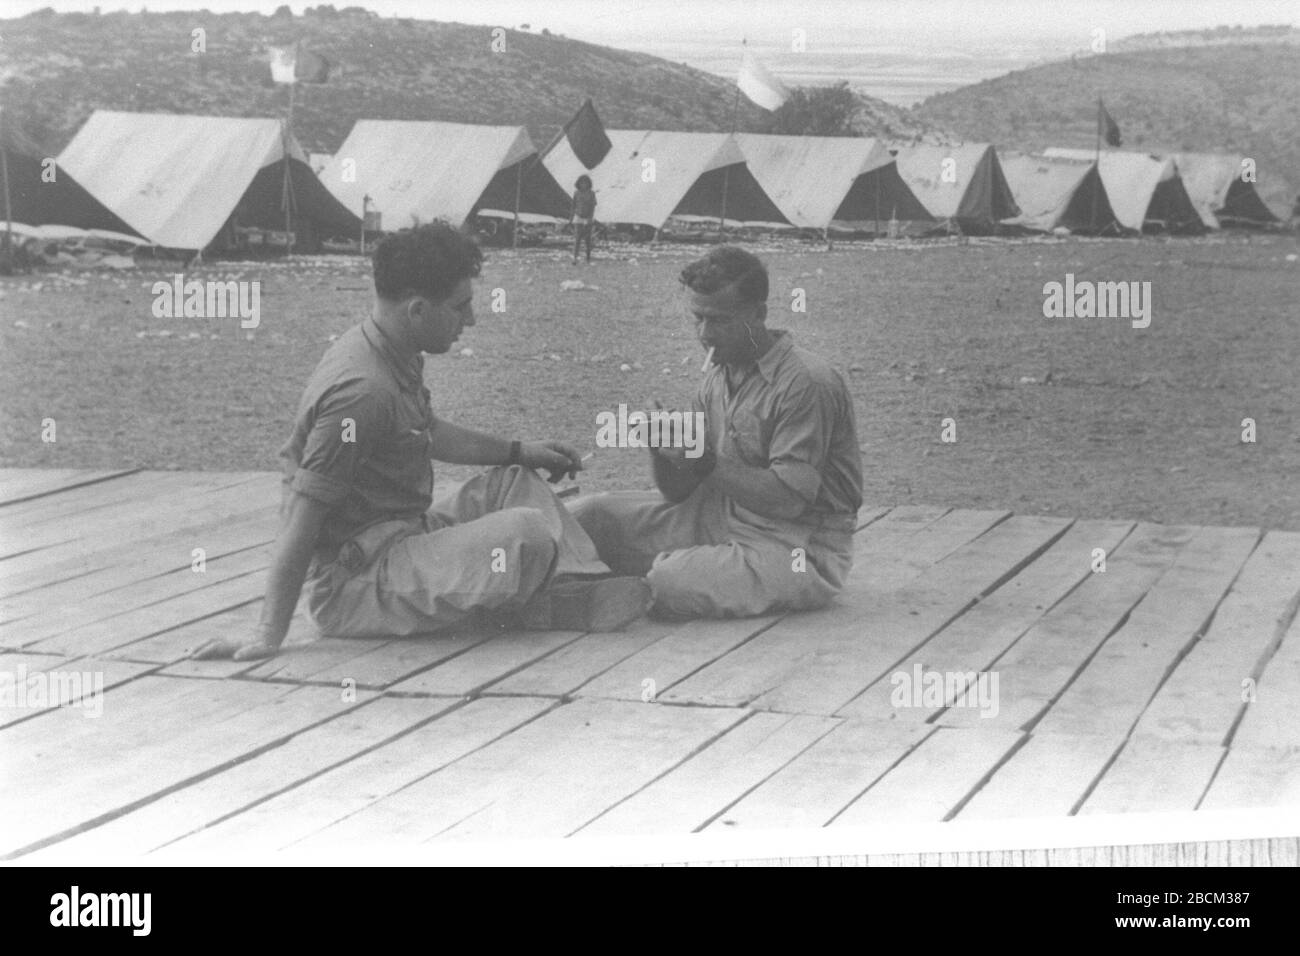 English Shimon Peres L With One Of His Colleagues At The Noar Haoved Summer Camp In Zichron Yaacov C U I U U O E I U I I I I I E I E U O I Ss O E N O I U O